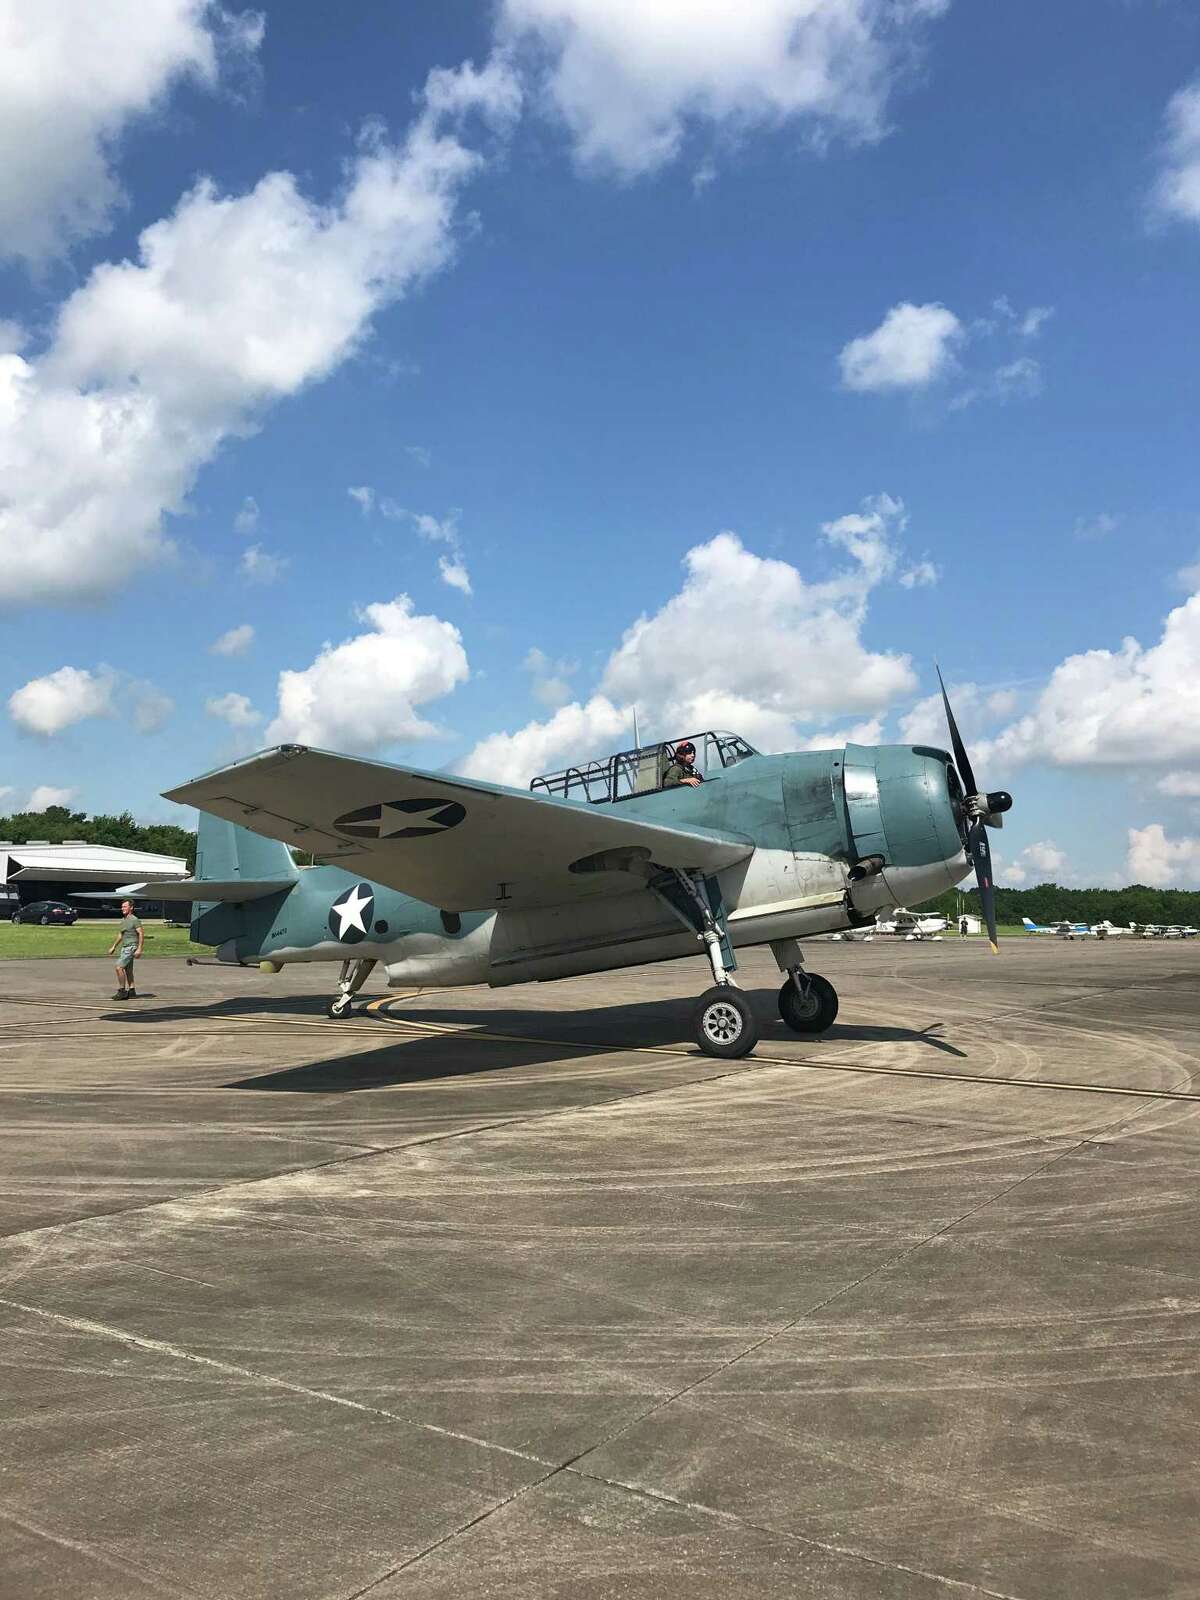 This TBM Avenger returns to Lone Star Flight Museum on Friday, Oct. 2, after a restoration. The aircraft is modeled after "Barbara III," which was the airplane former President George H.W. Bush was shot down in during World War II.